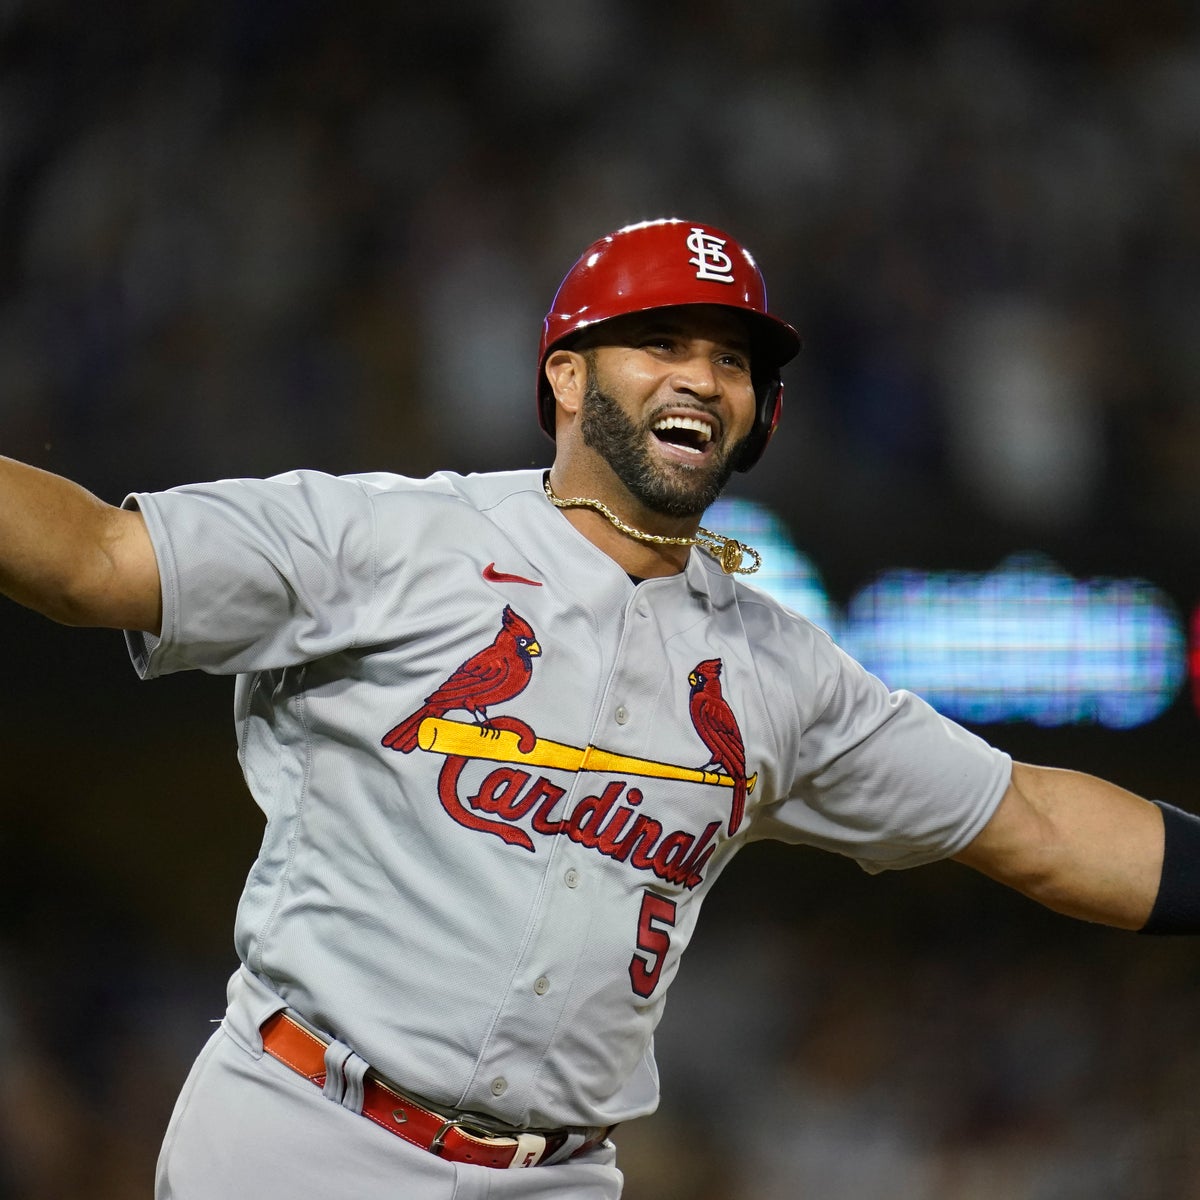 Cards' Pujols hits 700th home run, 4th player to reach mark